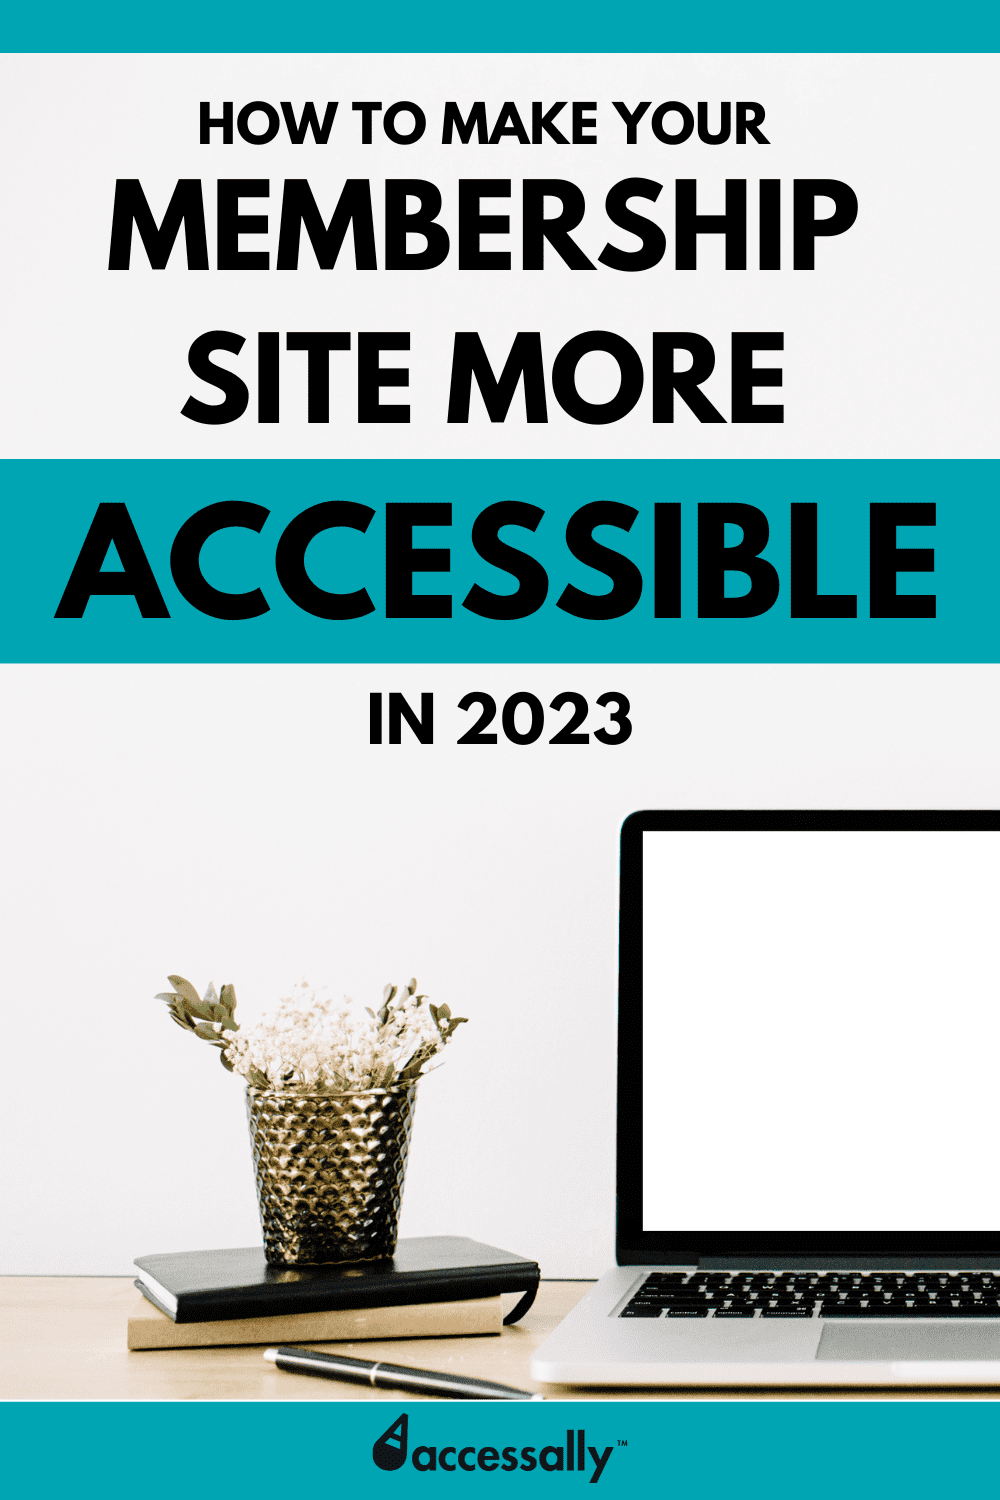 How to make your membership site more accessible in 2023 - laptop image